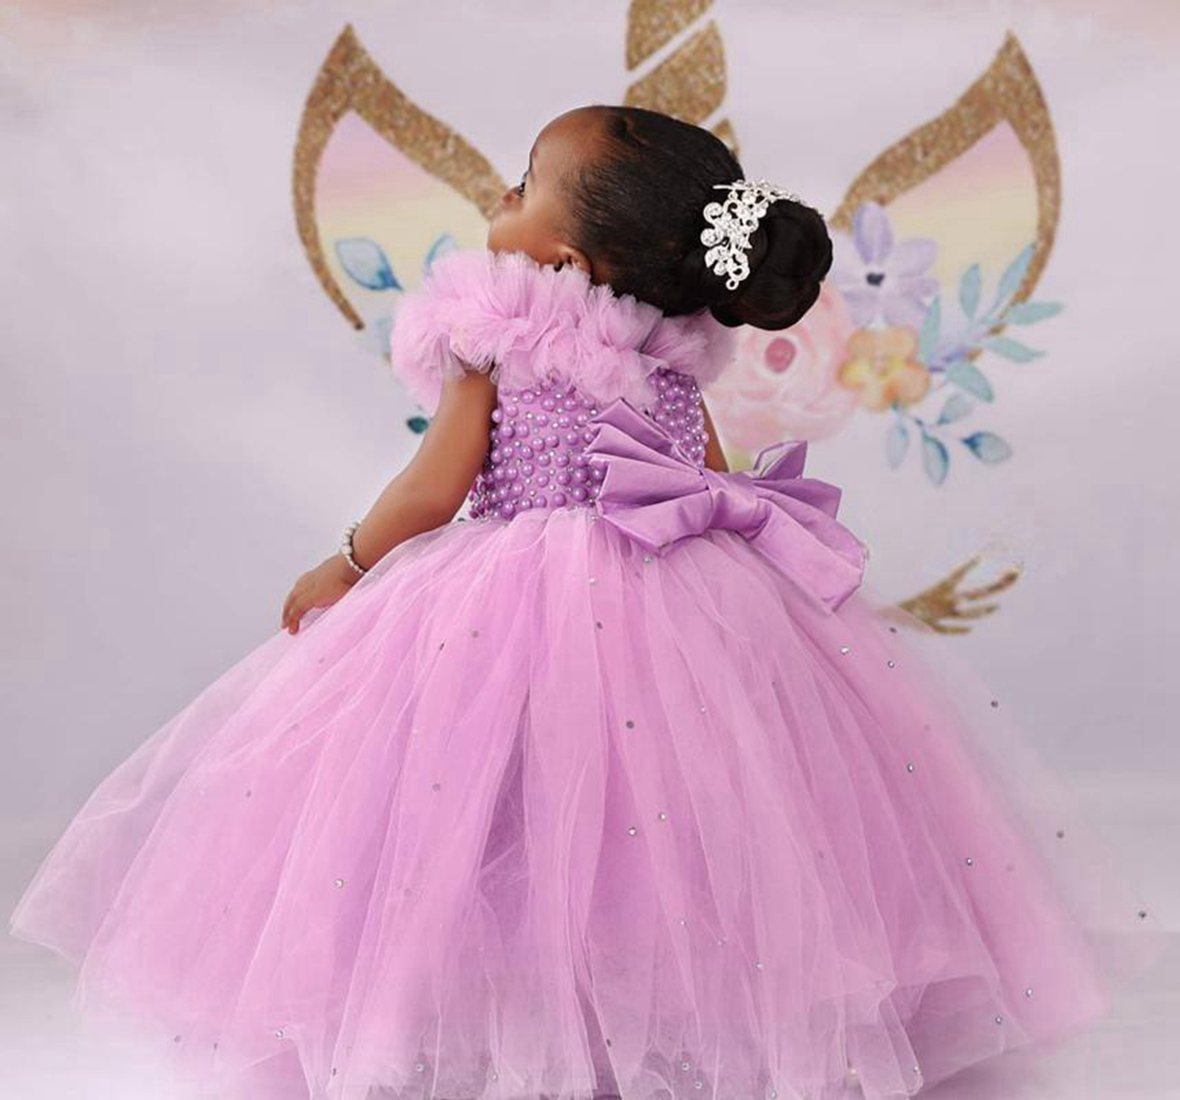 Lalic Flower Girl Dresses Pleated Jewel Pearls Tiered Tulle Ball Gowns Flowergirl Dress Princess Queen Hand Made Flowers Birthday Party Dress Gowns NF062